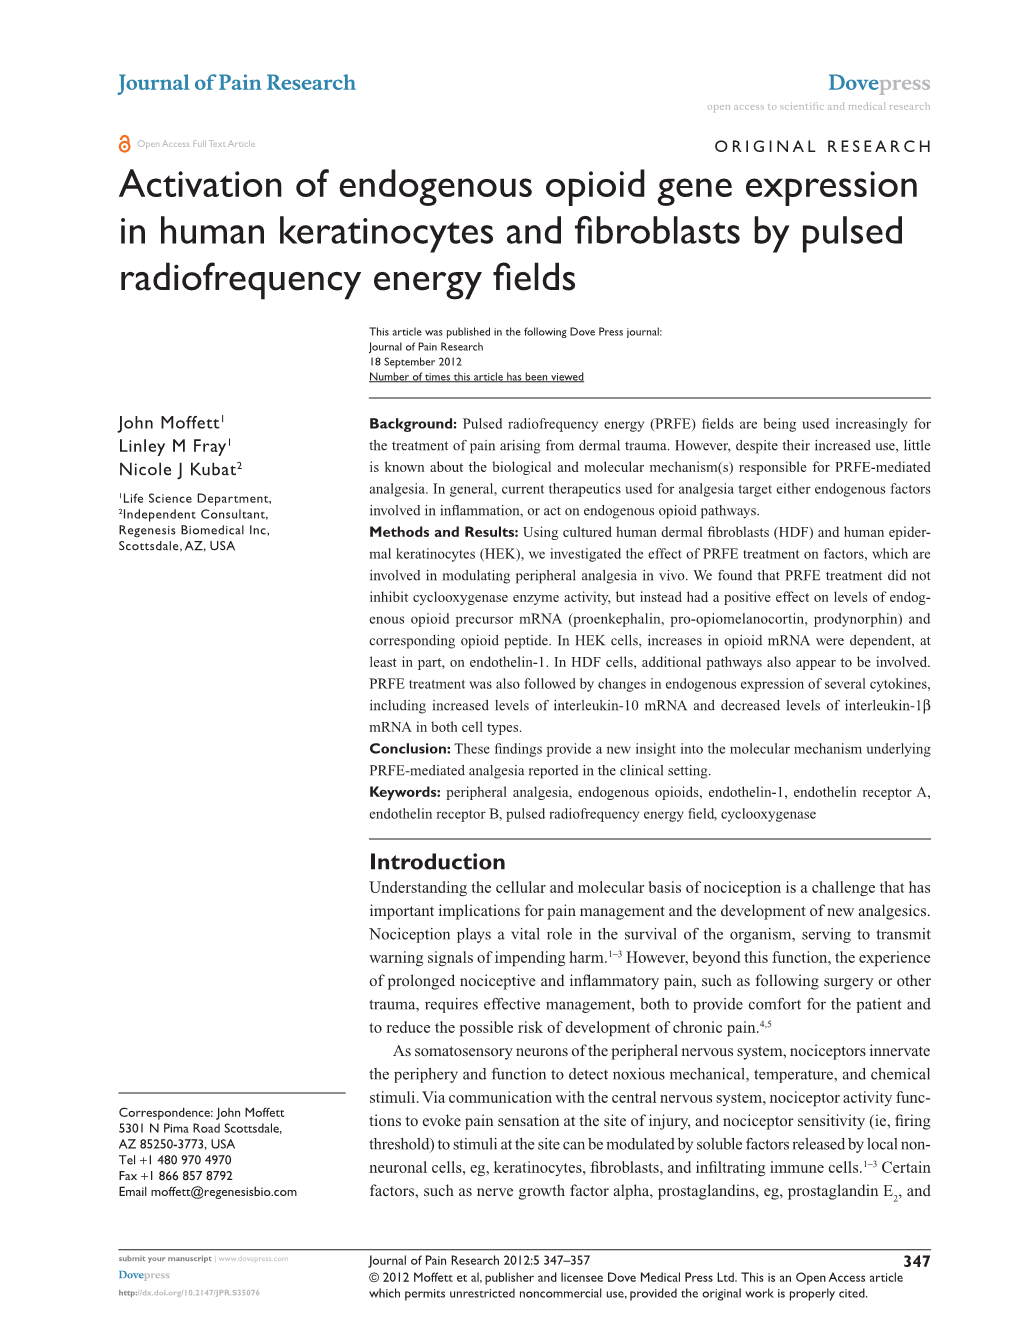 View the Journal Article About Endogenous Opioids